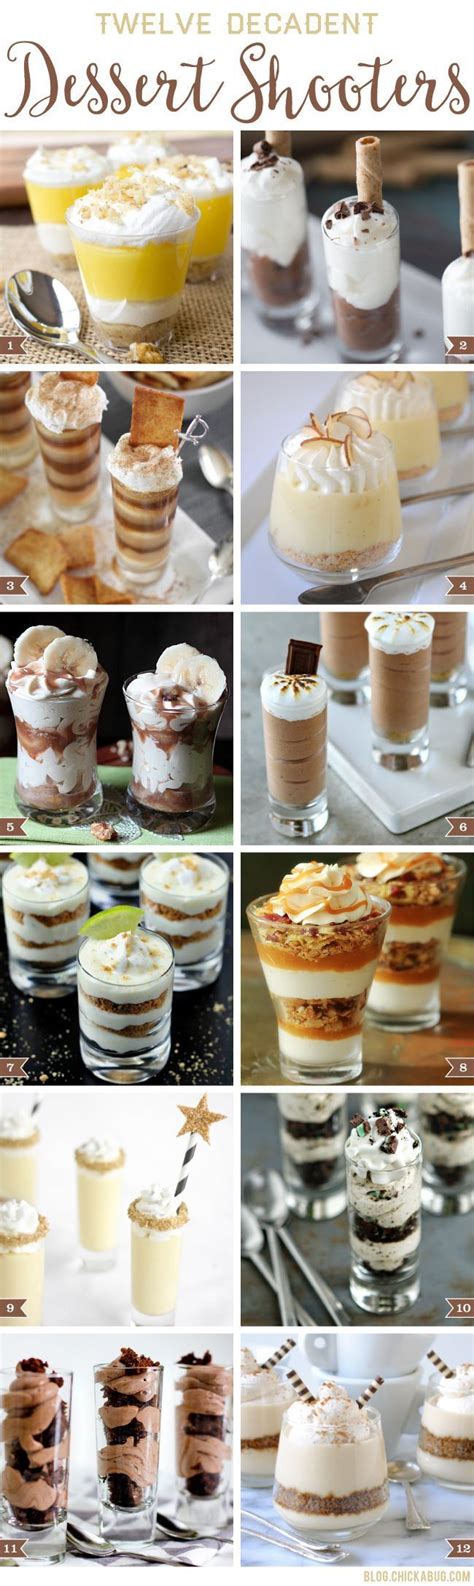 Cheesecake shot glass desserts recipe bettycrocker. Desserts in a shot glass are cute and classy, and dessert shooters are more fun than full-sized ...